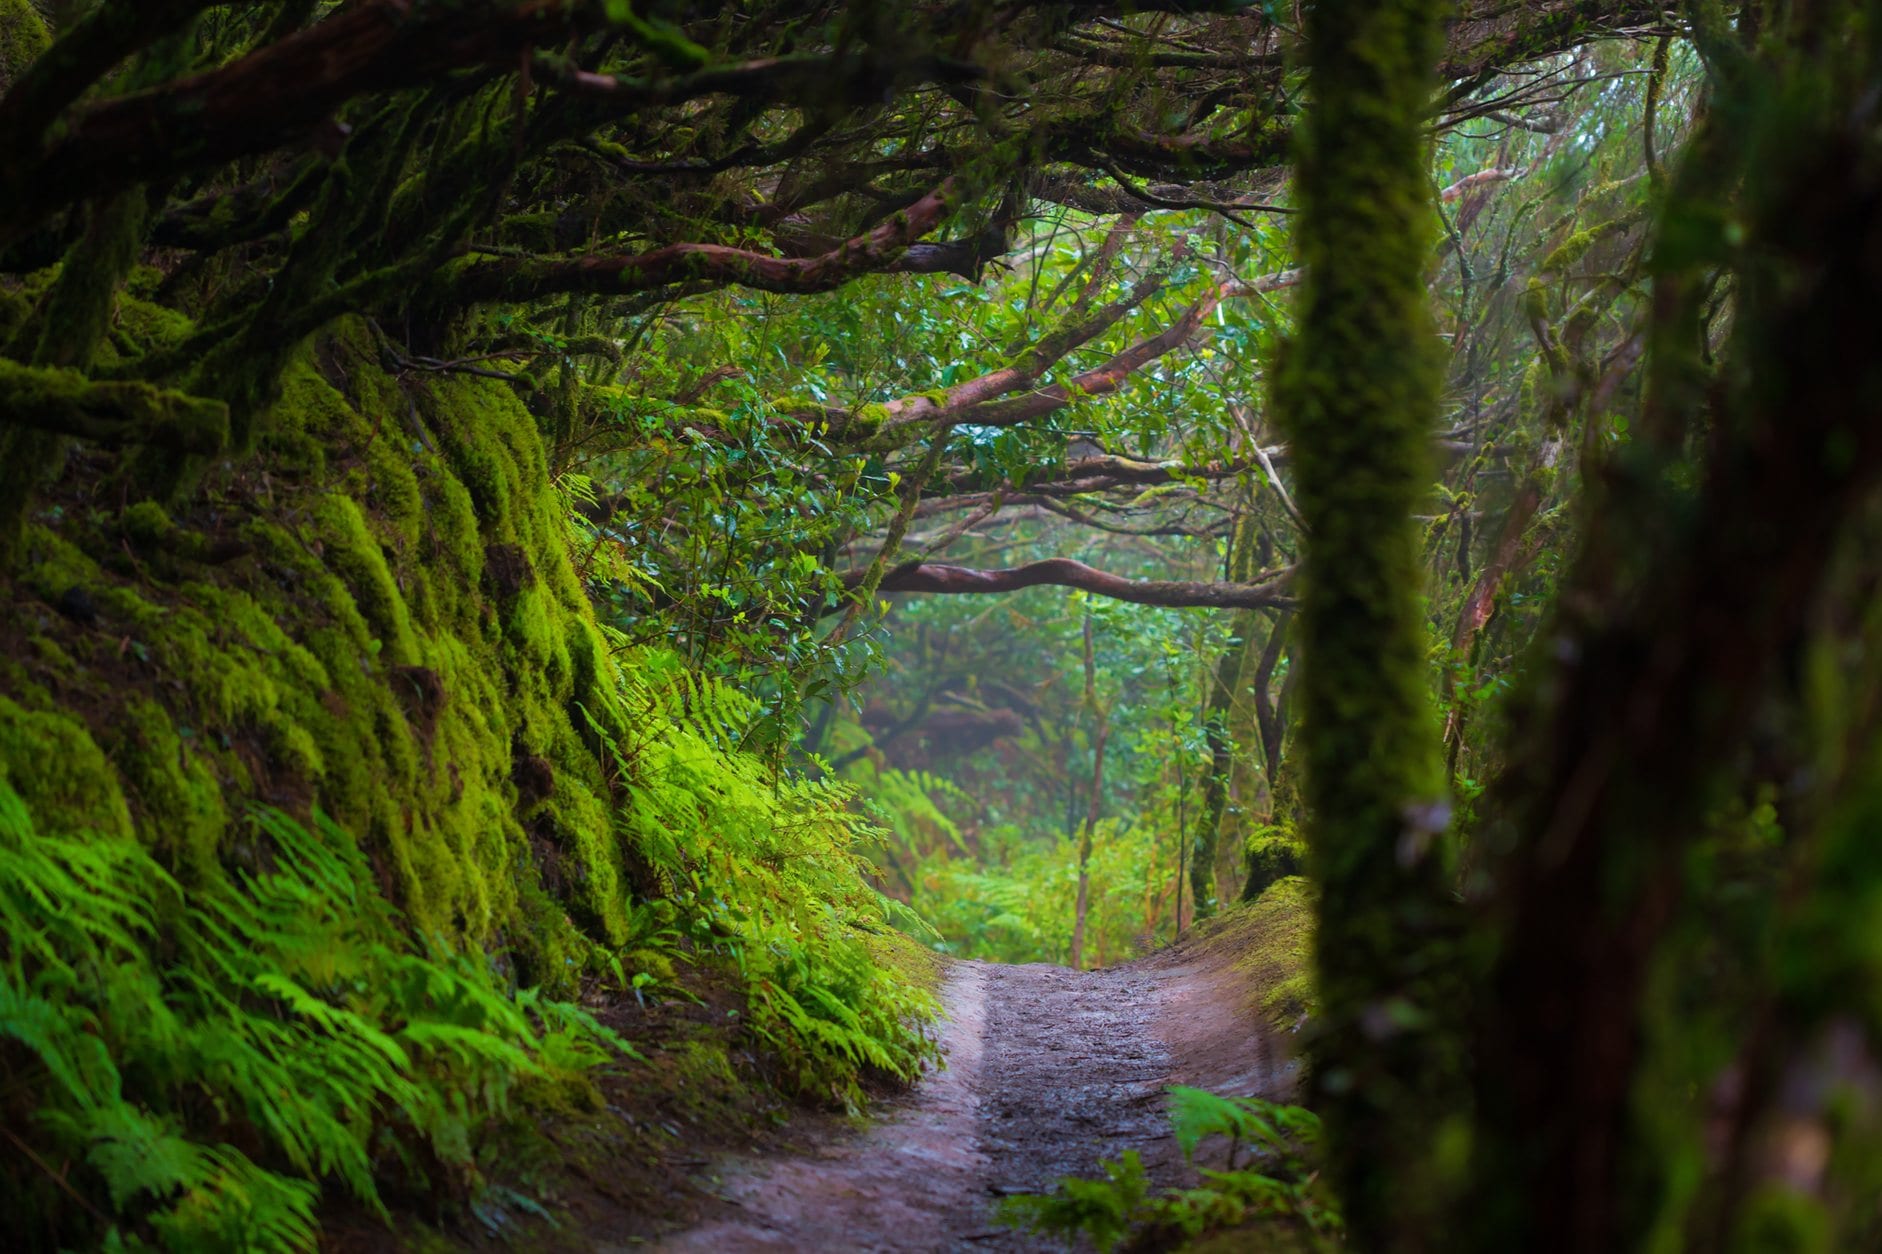 Image of a forest trail with branches hanging over the trail and a moss covered hill on the left